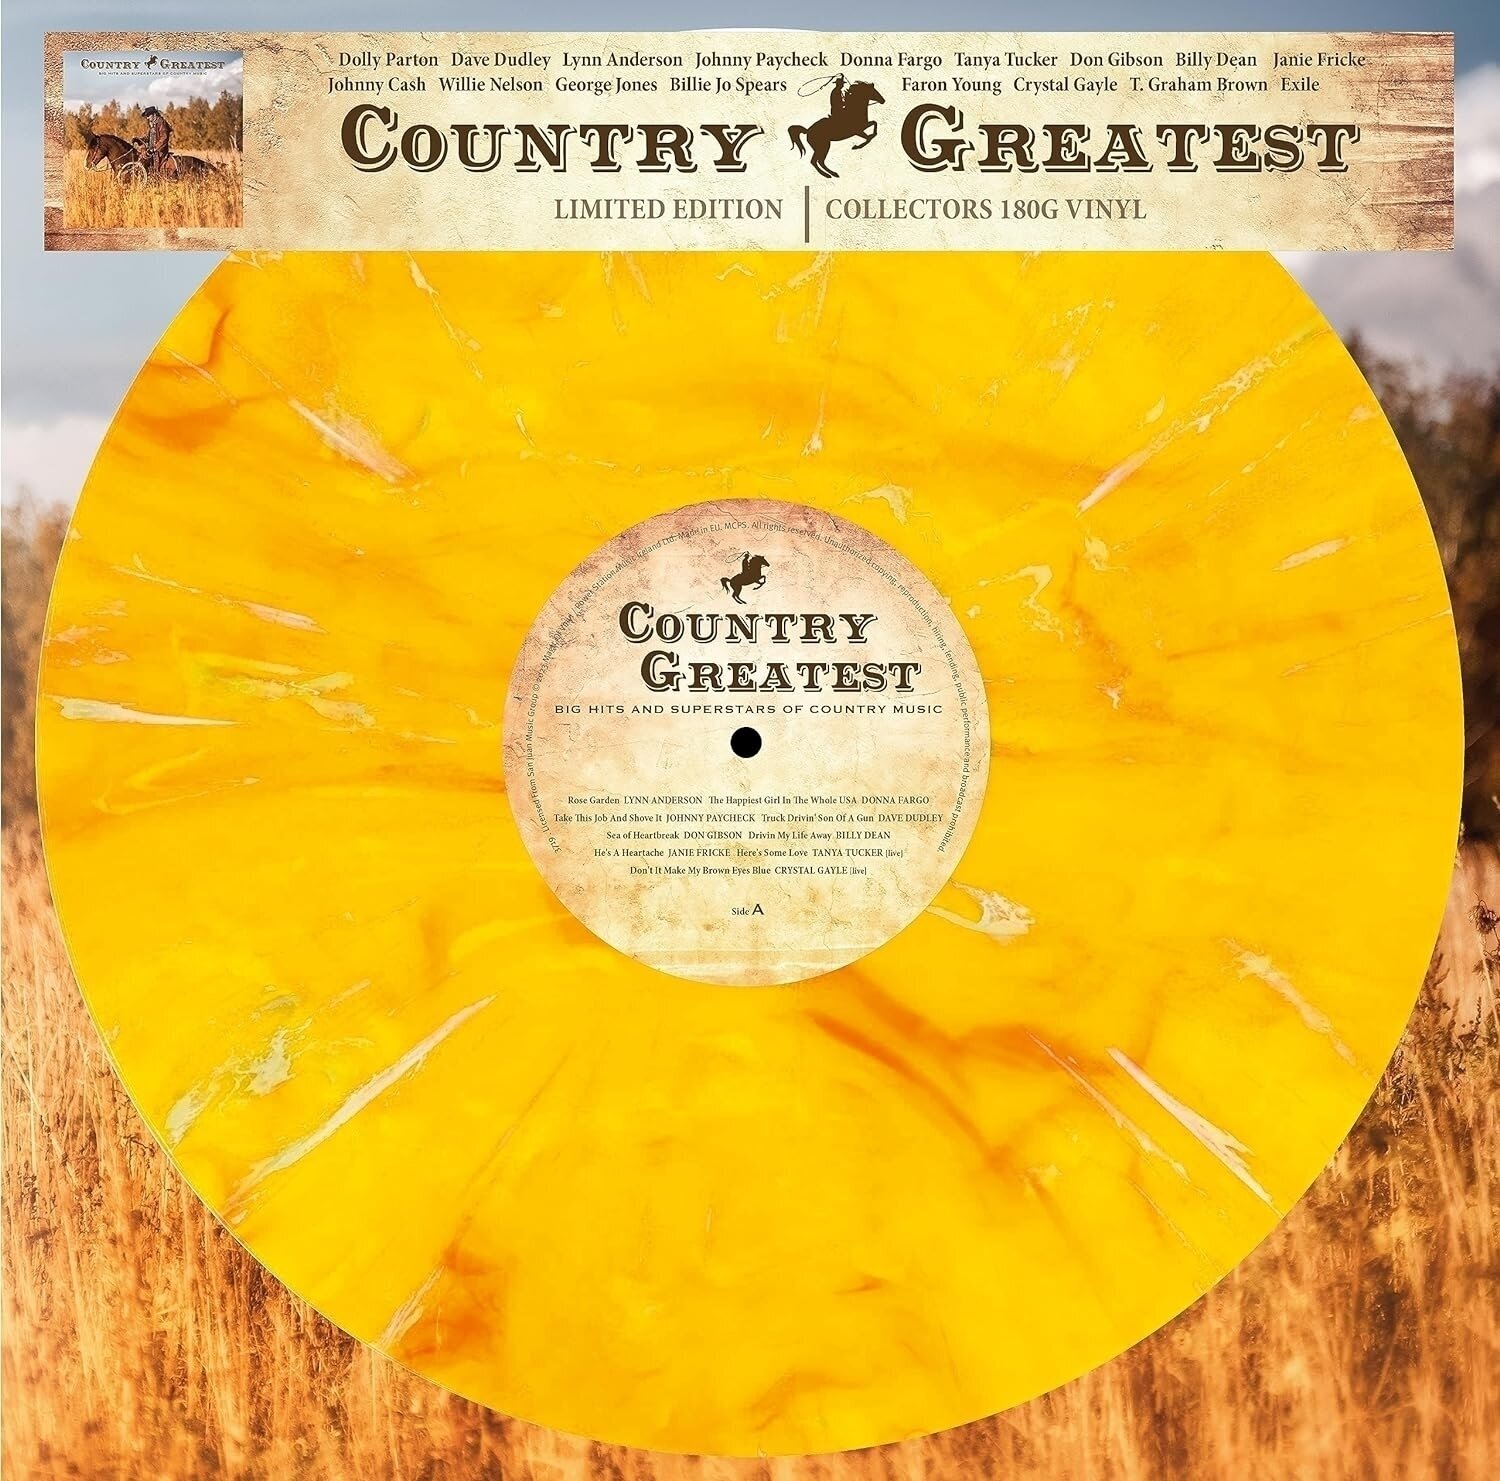 Vinyl Record Various Artists - Country Greatest - Big Hits And Superstars Of Country Music (Limited Edition) (Yellow Marbled) (LP)